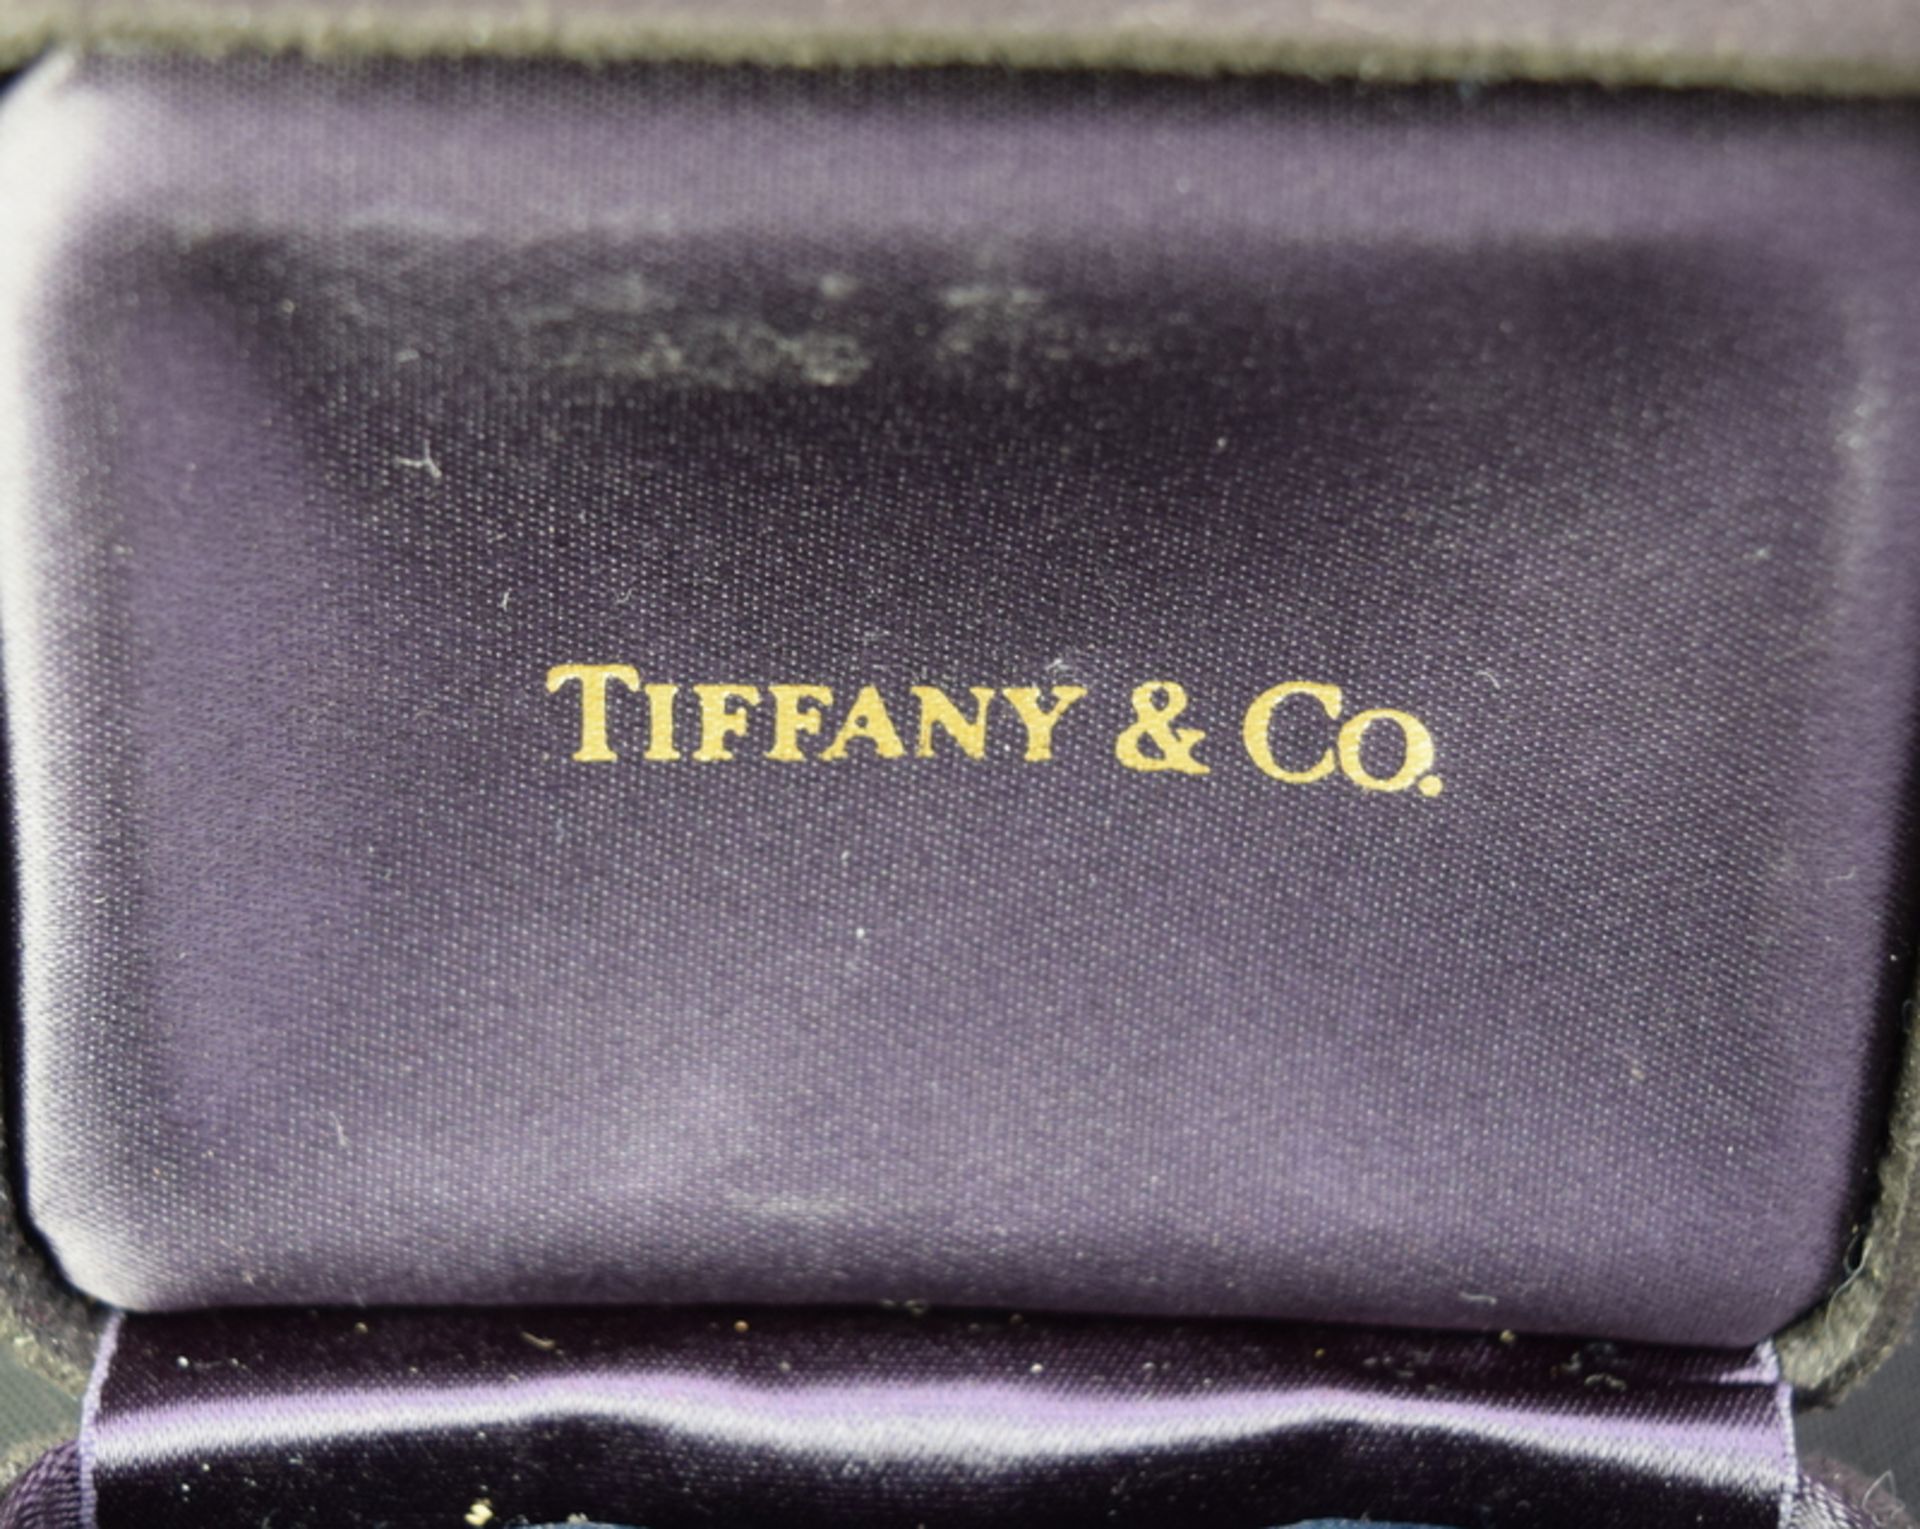 Exquisite Pair Of 18ct Gold Tiffany Cufflinks - Image 6 of 6